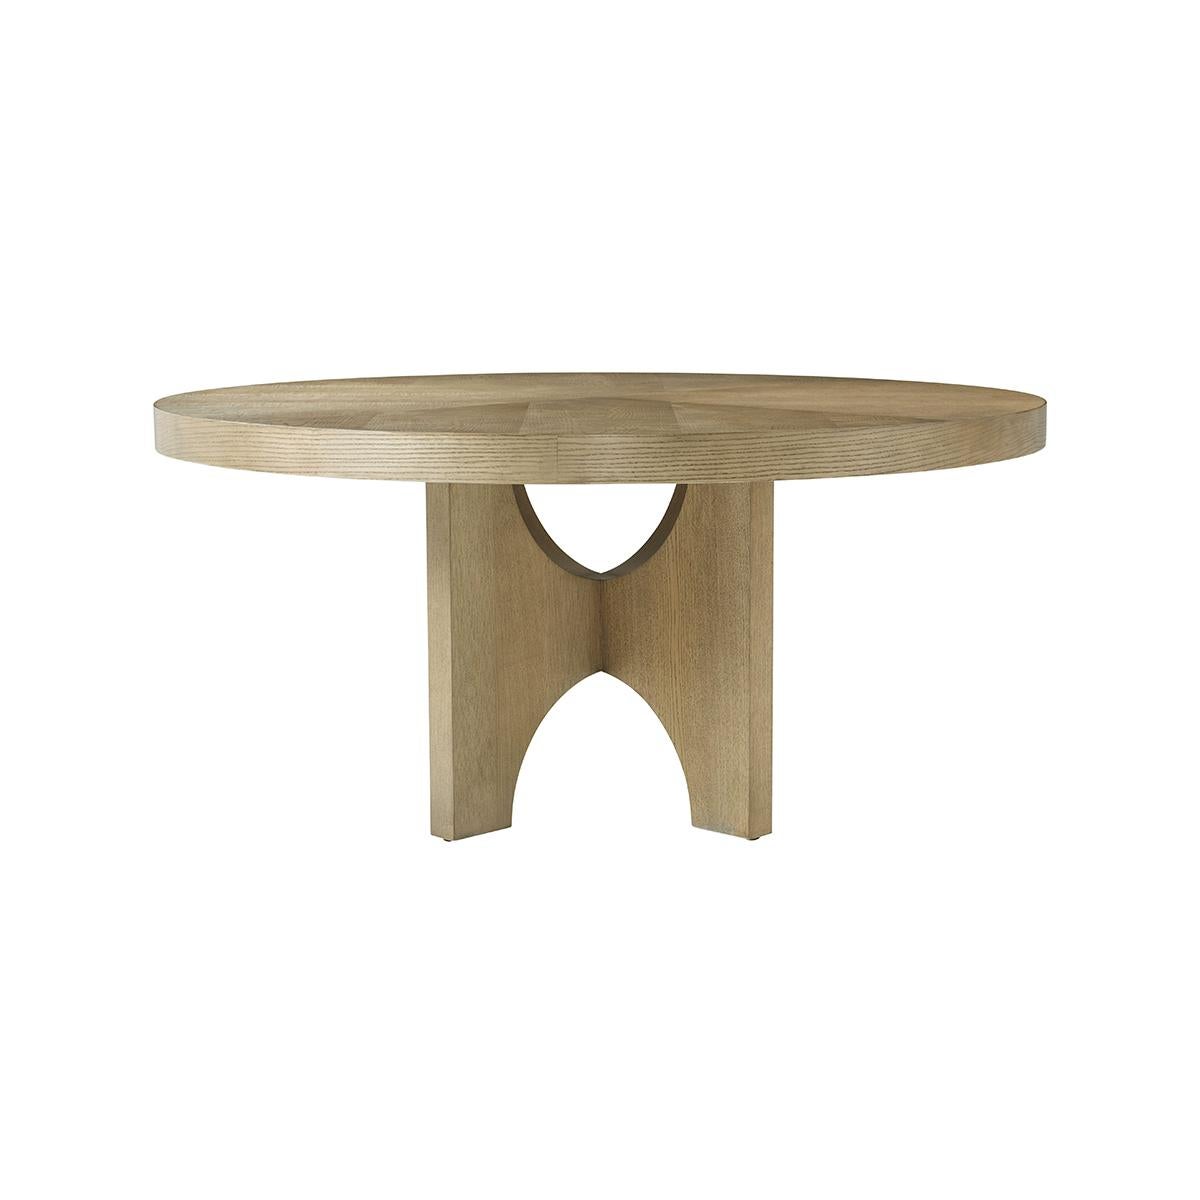 Modern Light Ash Dining Table, crafted from premium-figured cathedral ash in the Dune finish, this dining table boasts a rich texture and a sleek, light finish that adds a touch of elegance to any dining room. The round shape of the table invites an